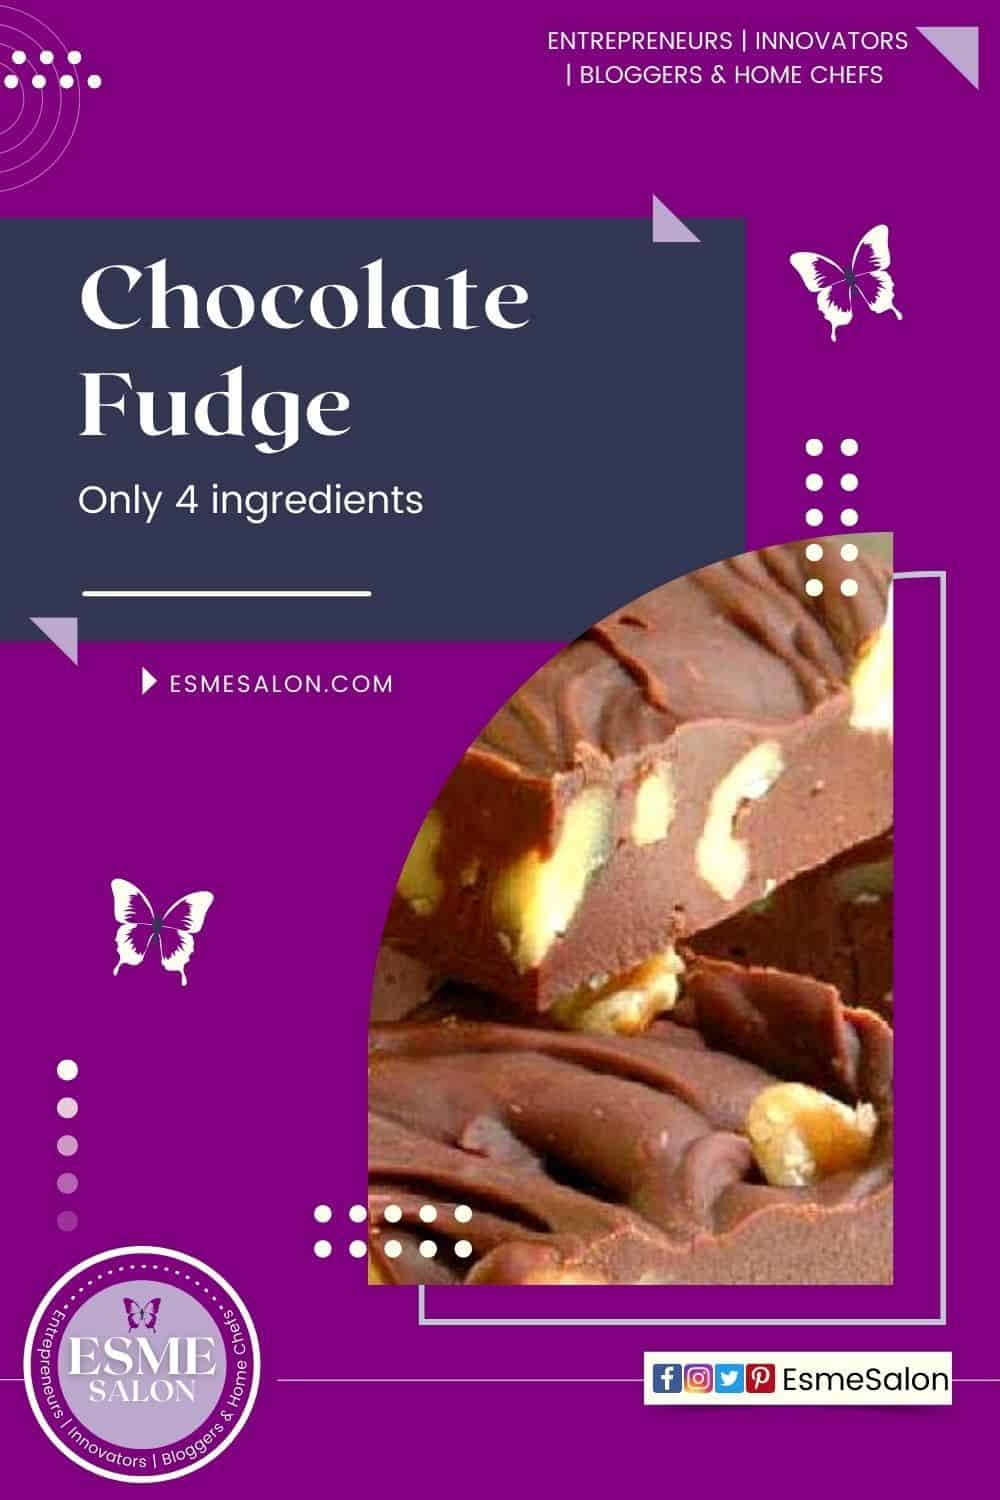 Chocolate Fudge made with 4 easy ingredients